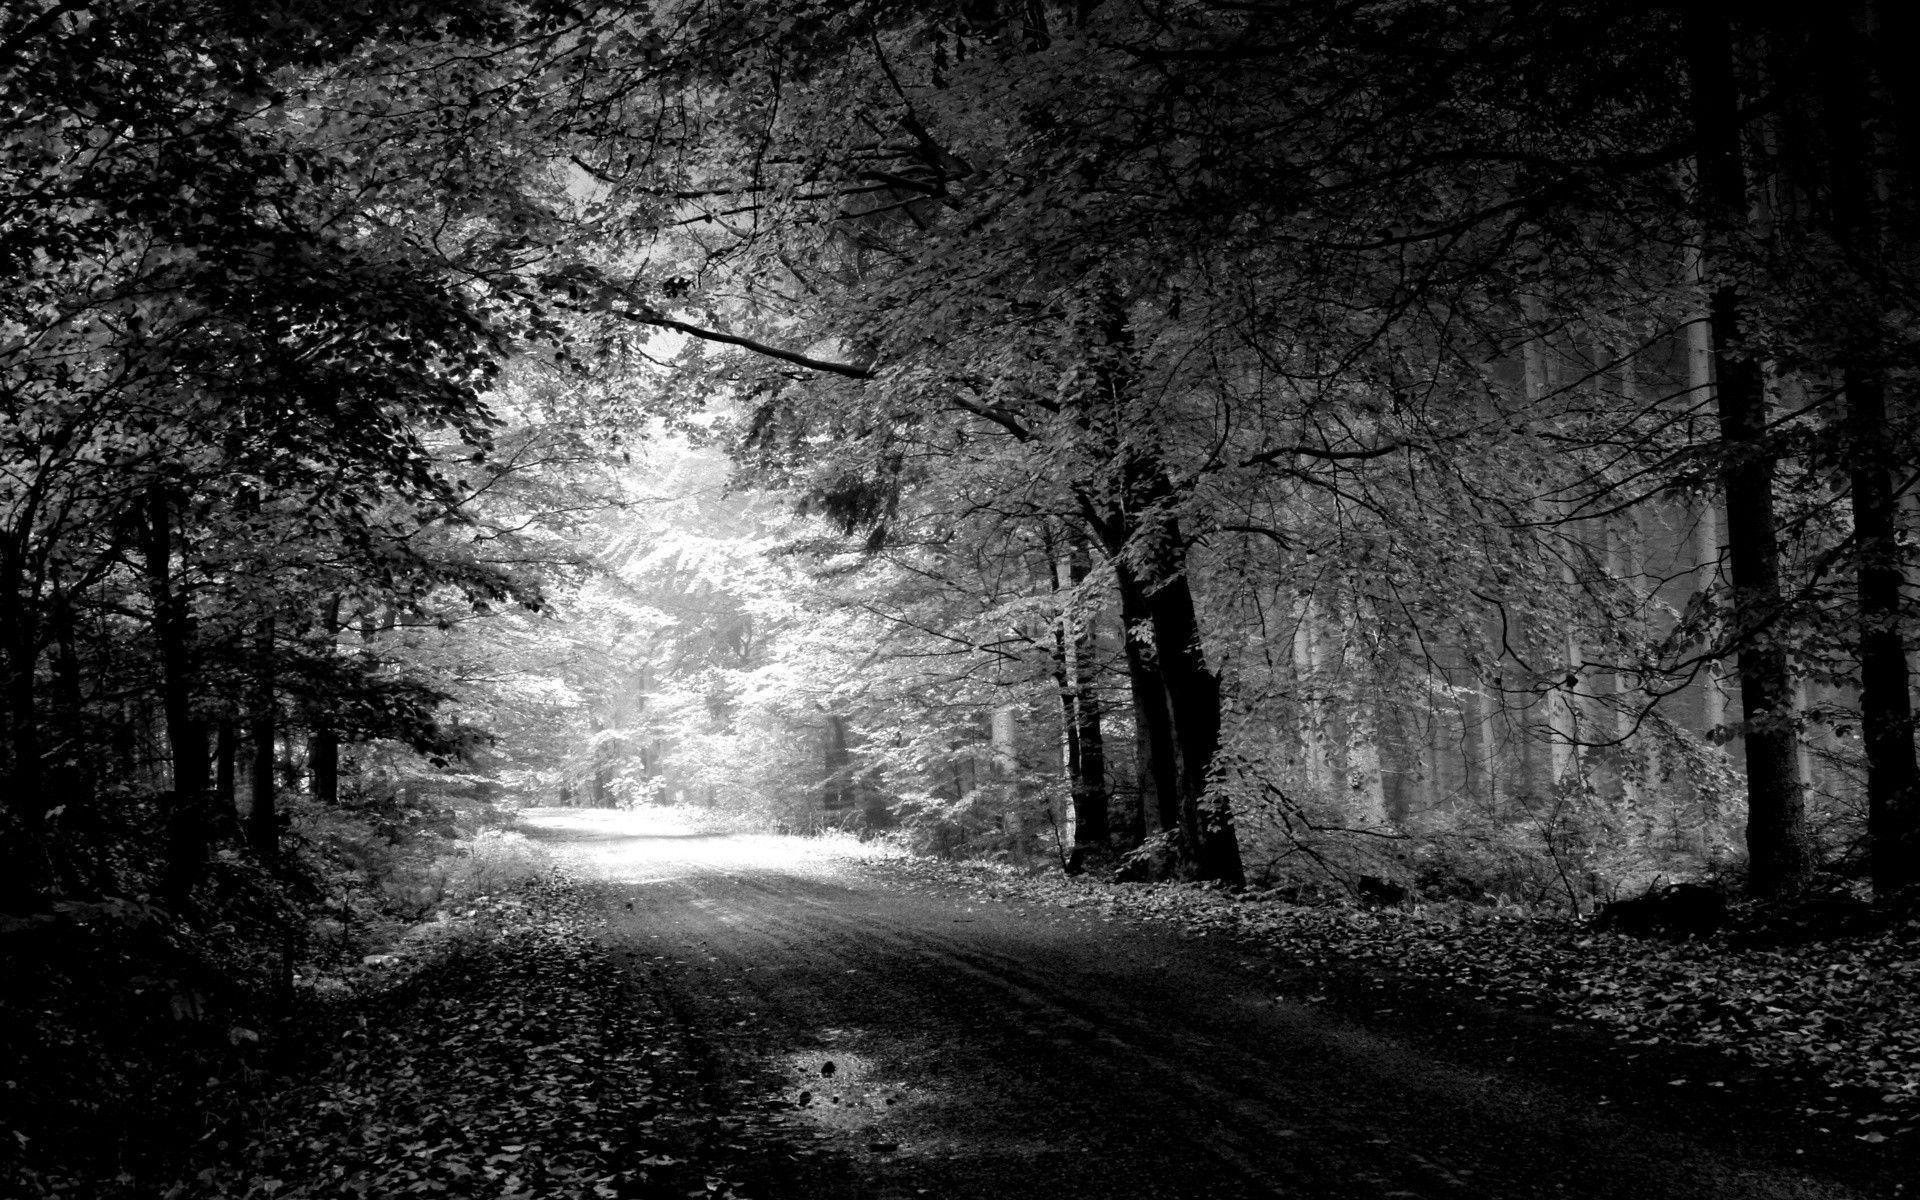 Black And White Nature Wallpapers Wallpaper Cave